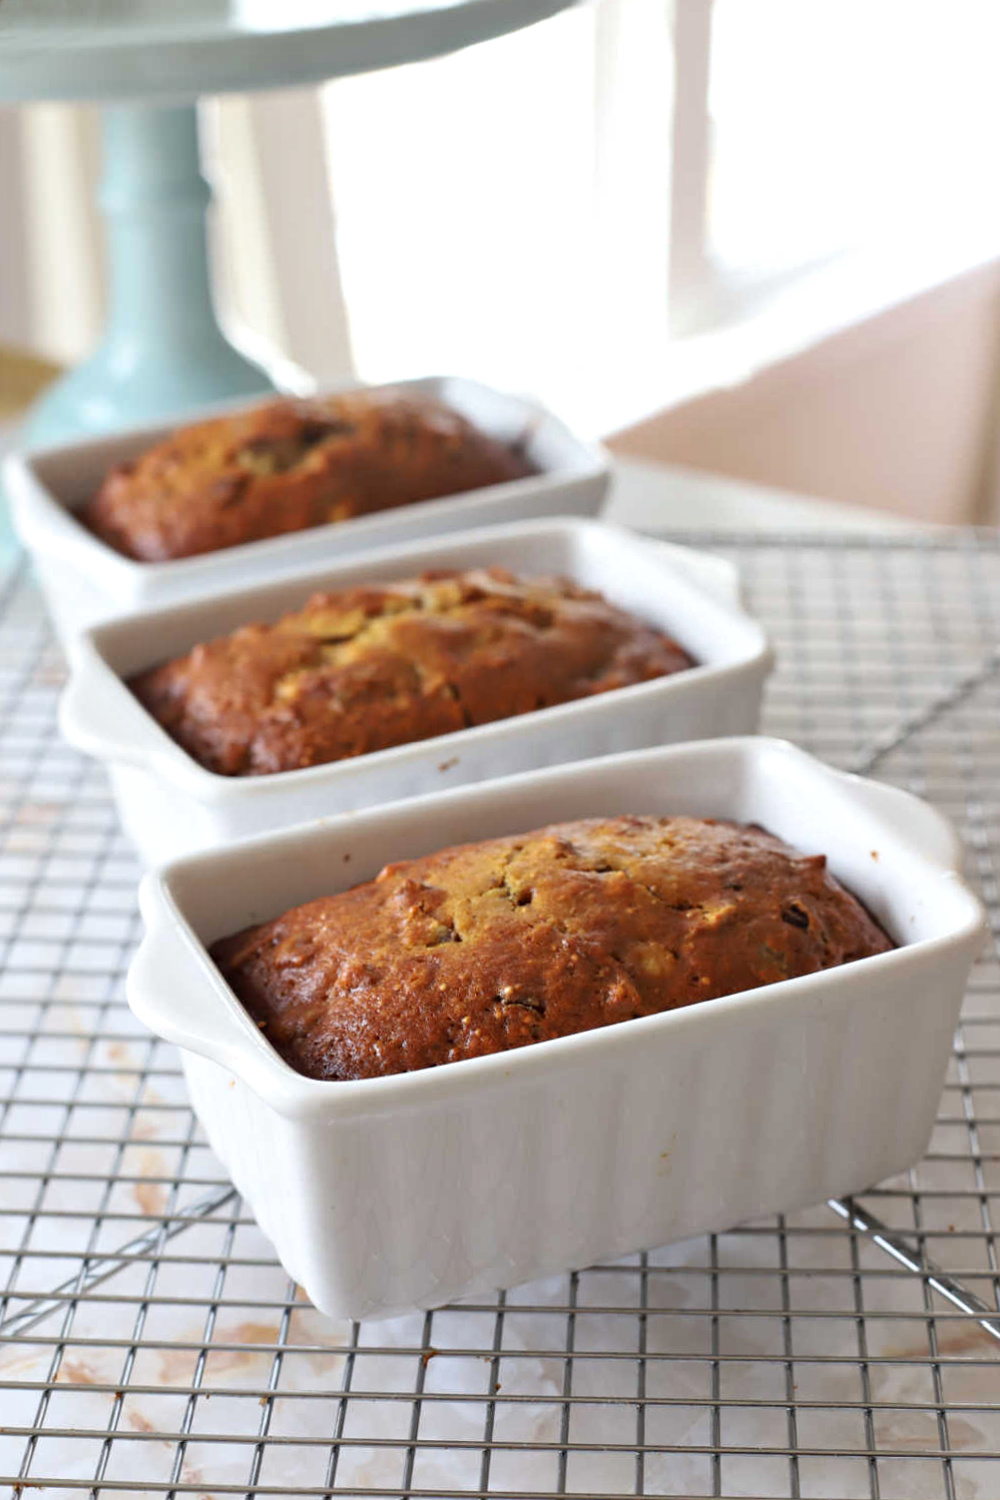 Baked mini loaf fig & Date nut quick bread recipe.